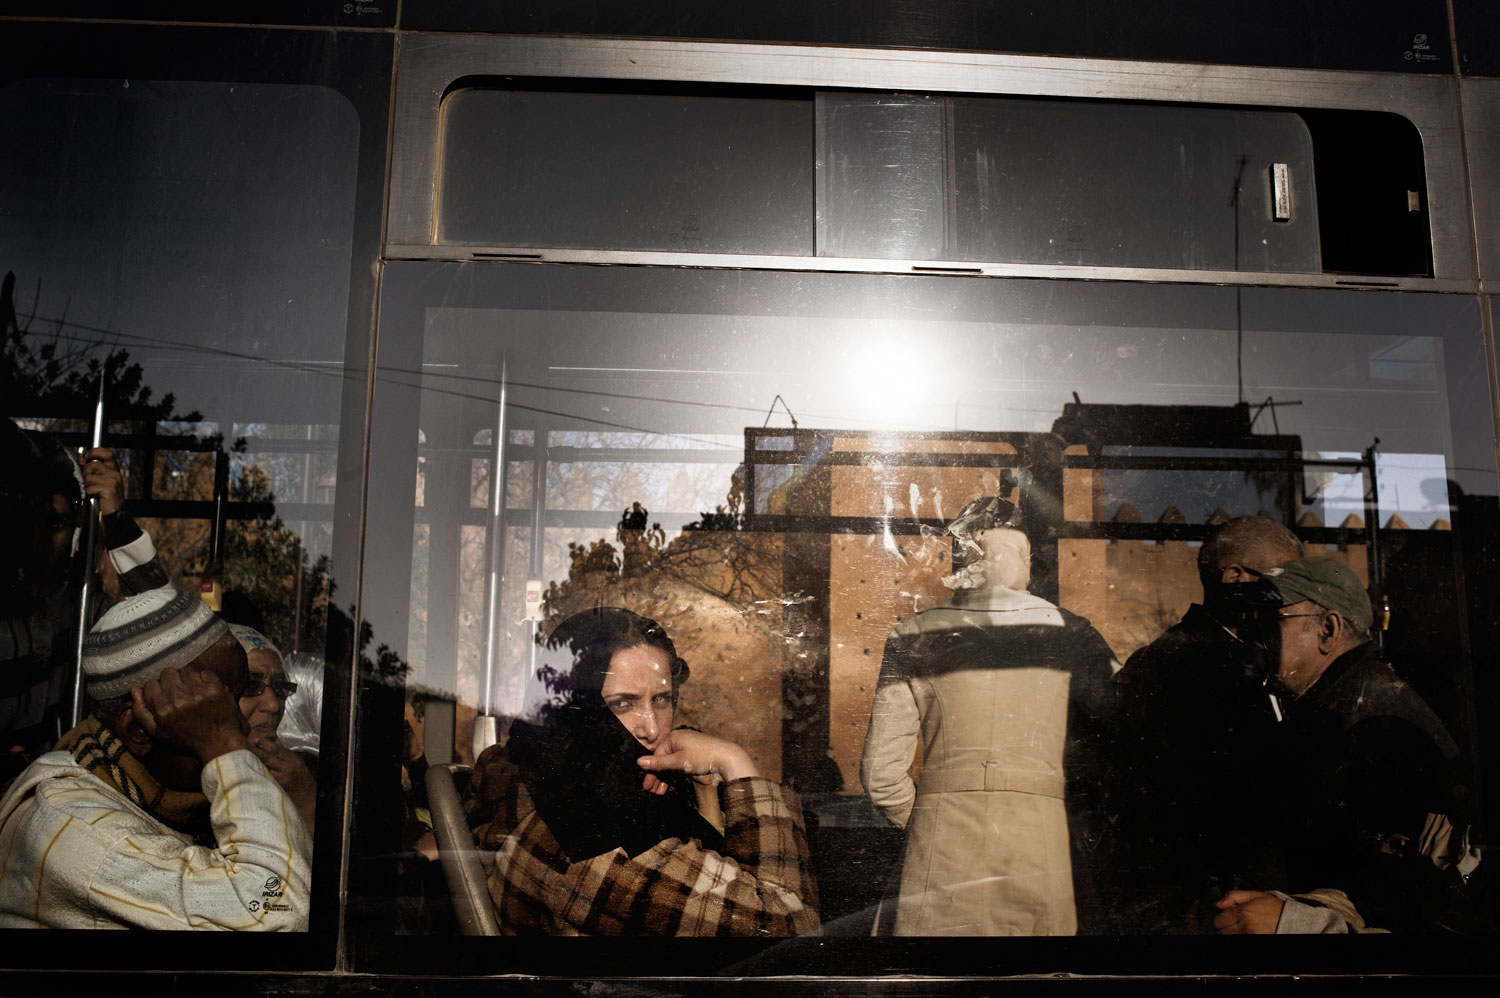 March 2012. Passengers are seen on a tram in Rabat, Morocco.